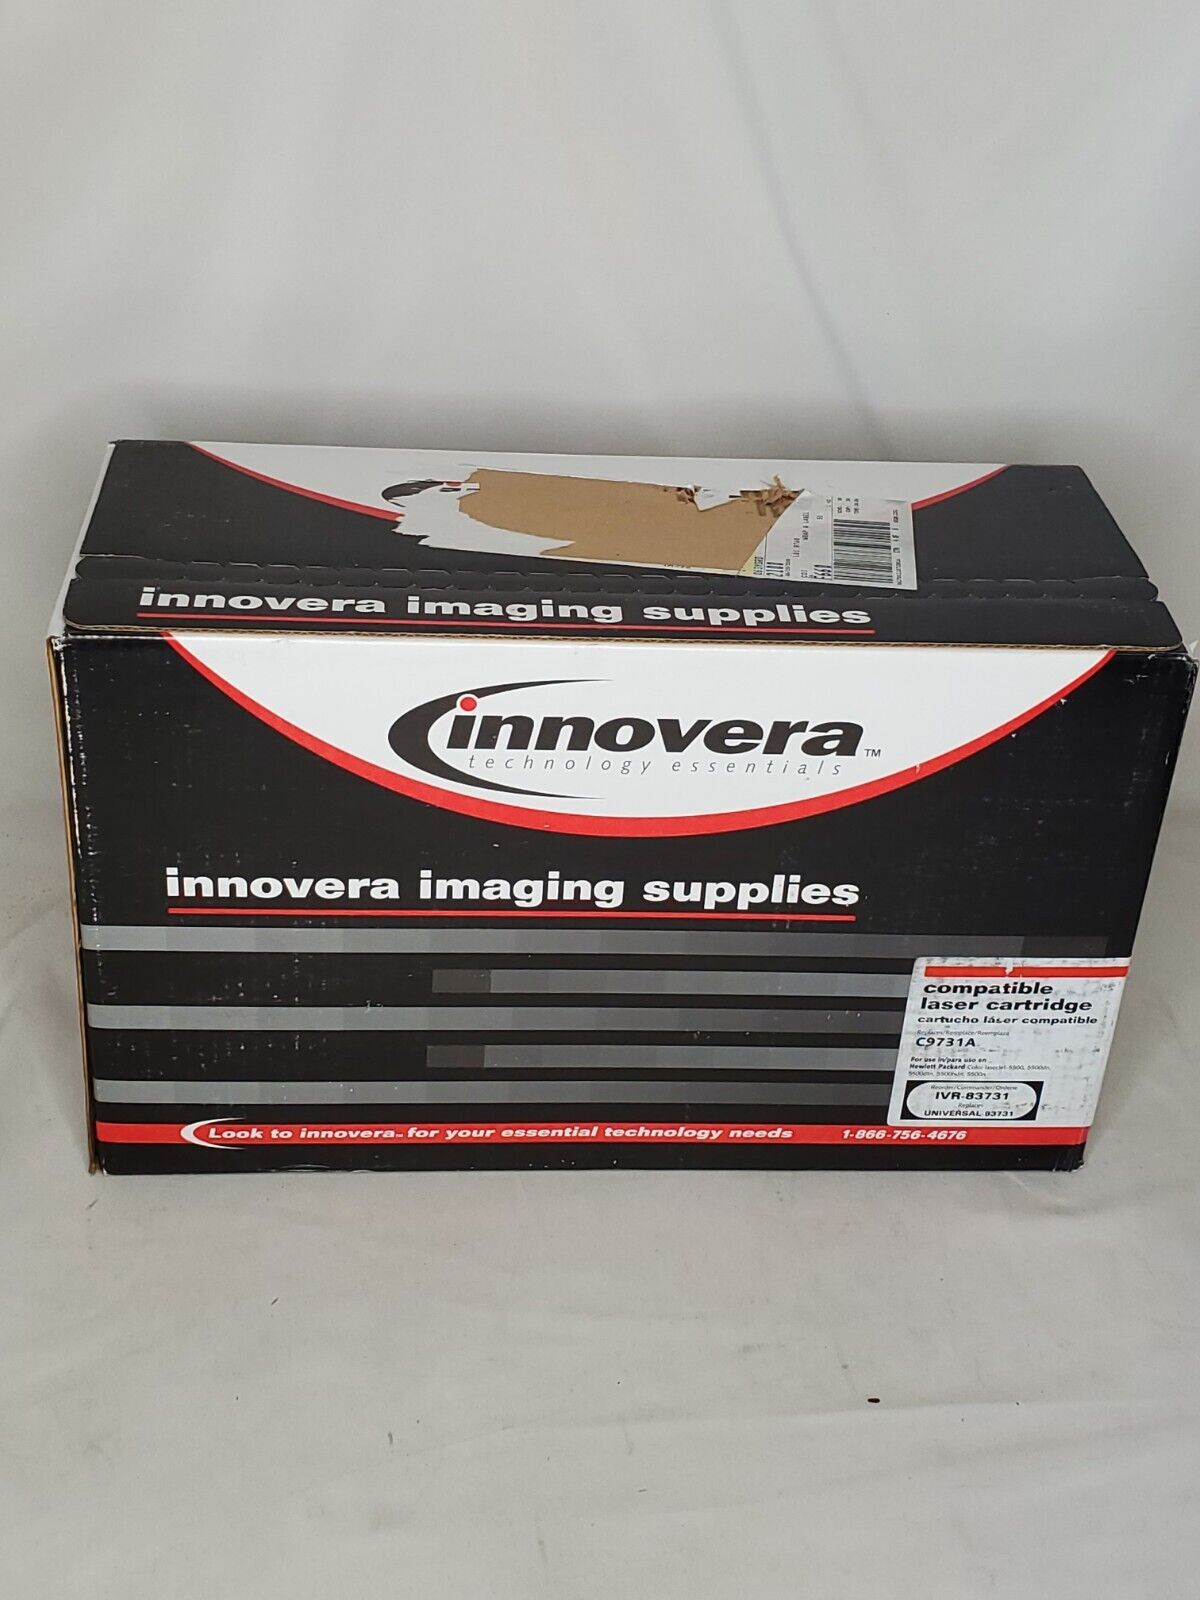 Innovera C9731A Cyan Color Laser IVR-83731 Imaging Supplies